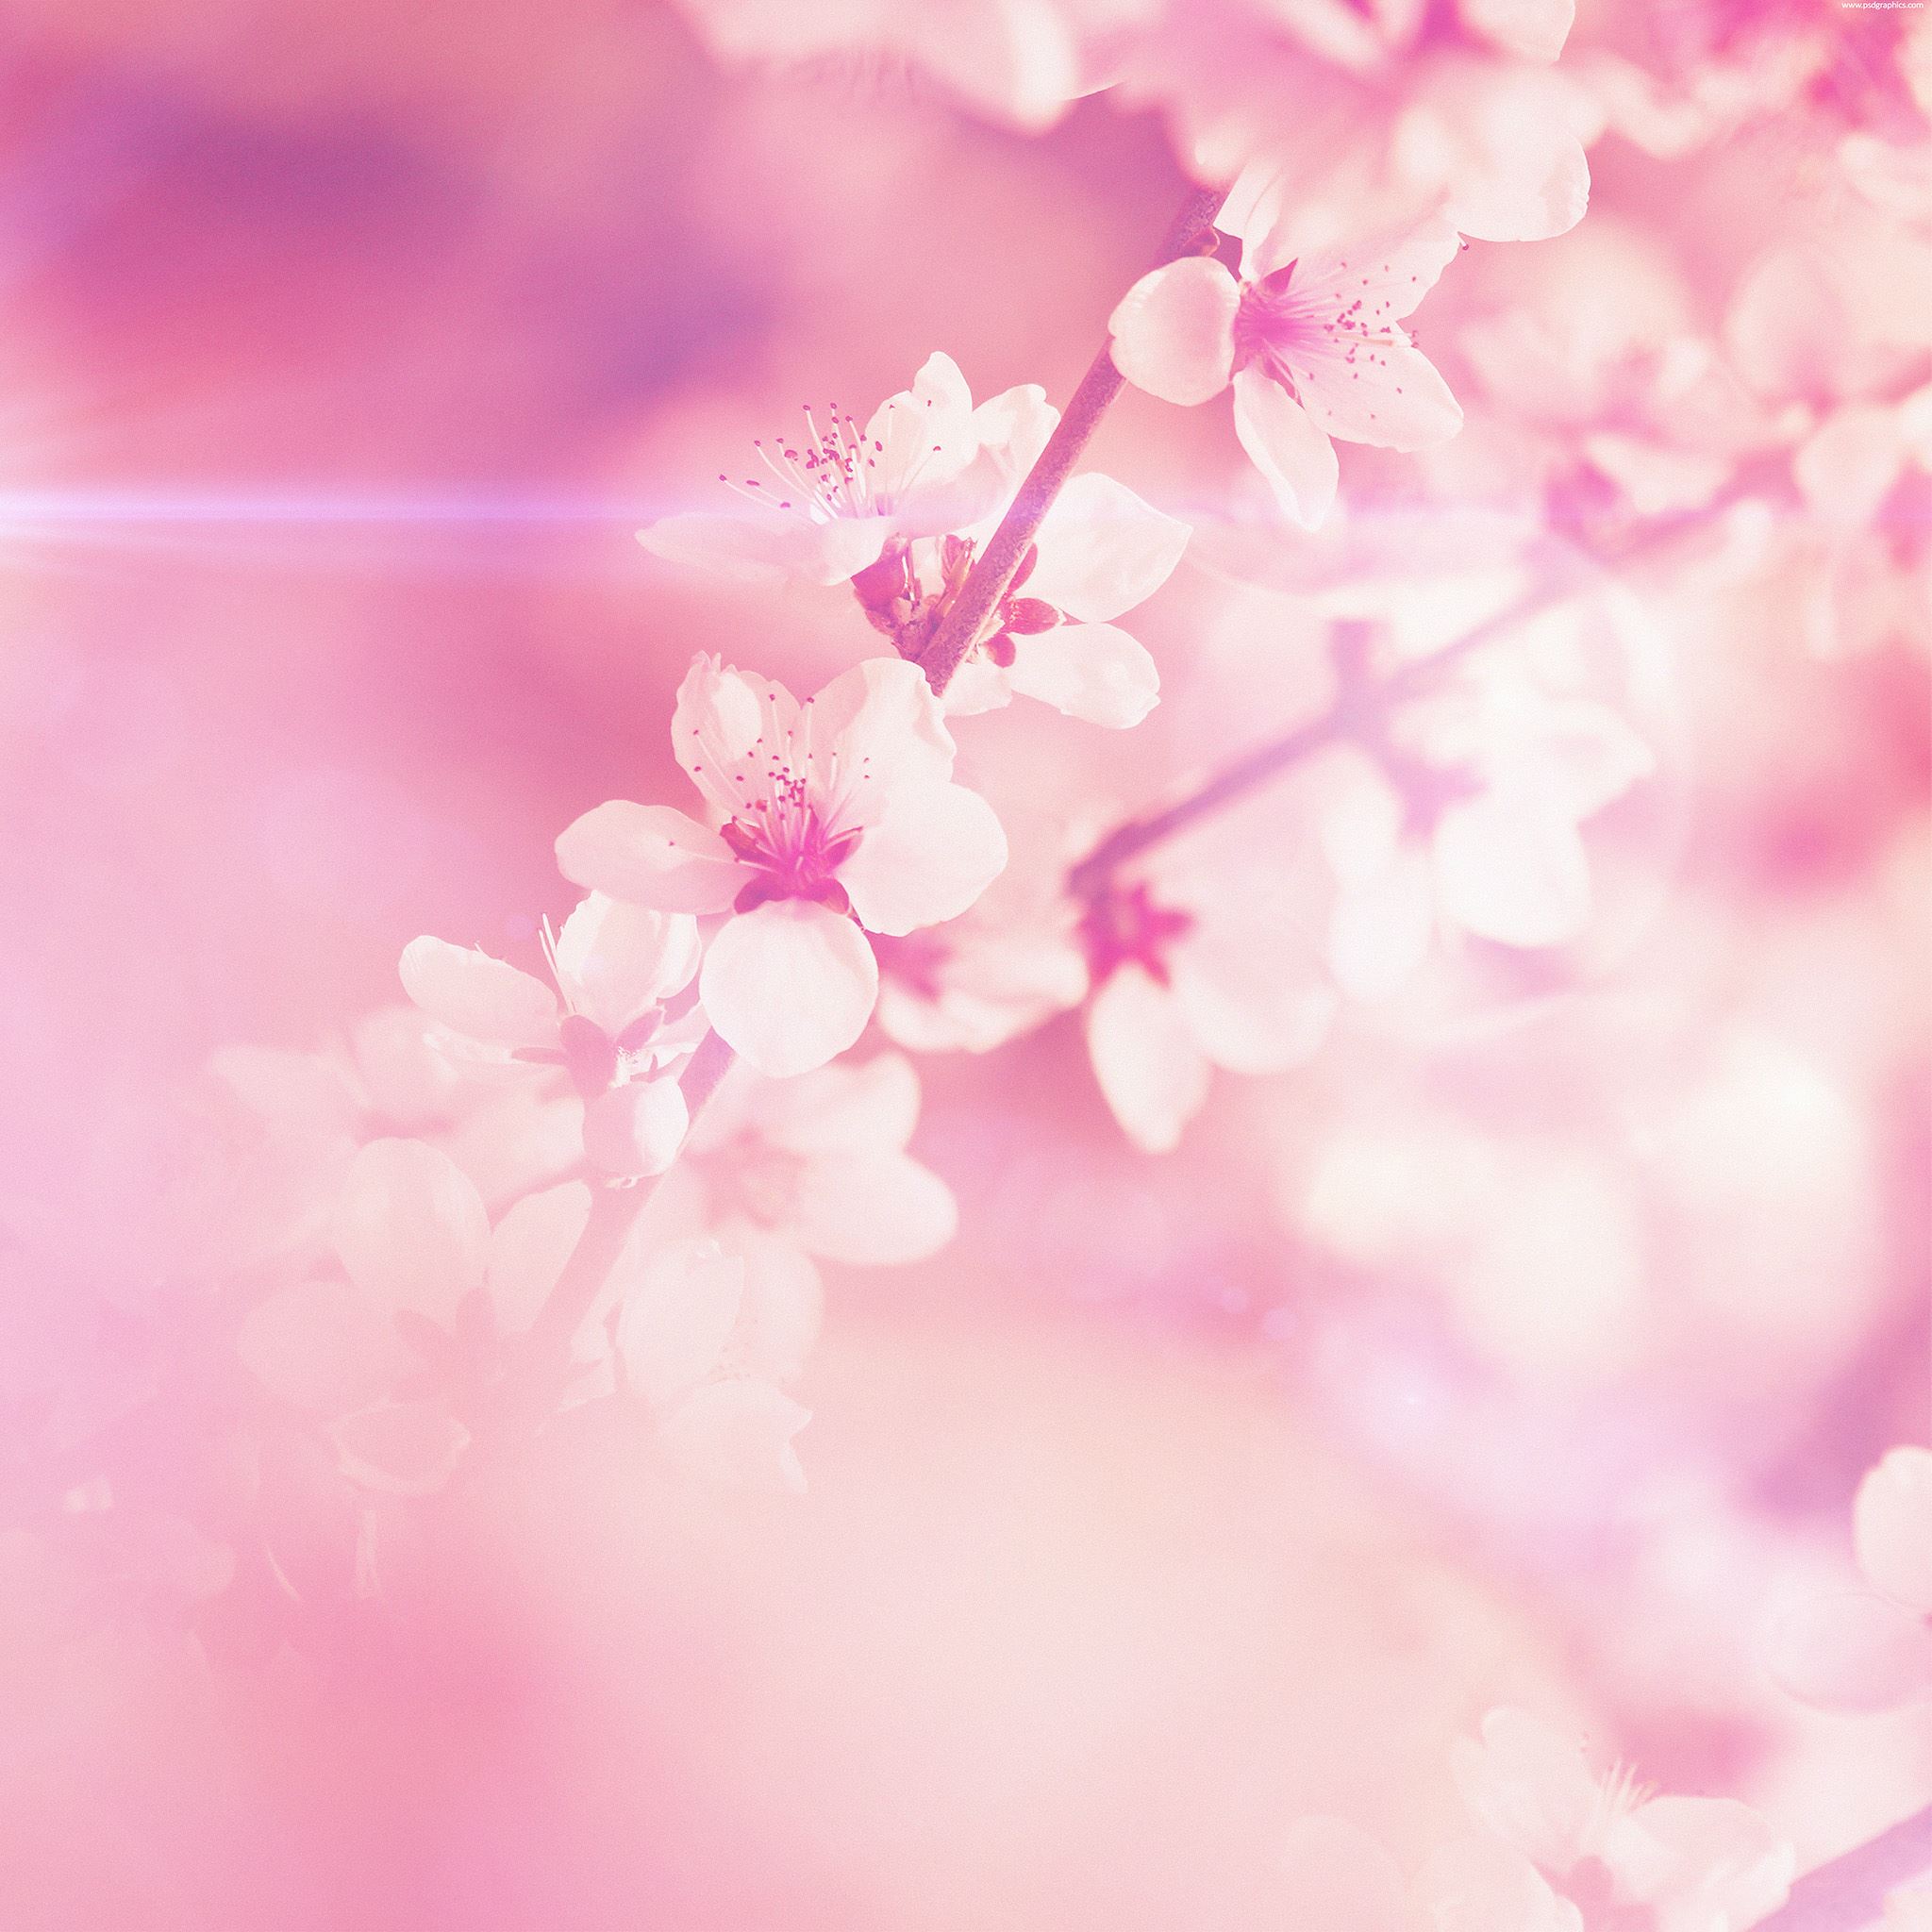 Spring Pink Cherry Blossom Flare Nature iPad Air wallpaper 